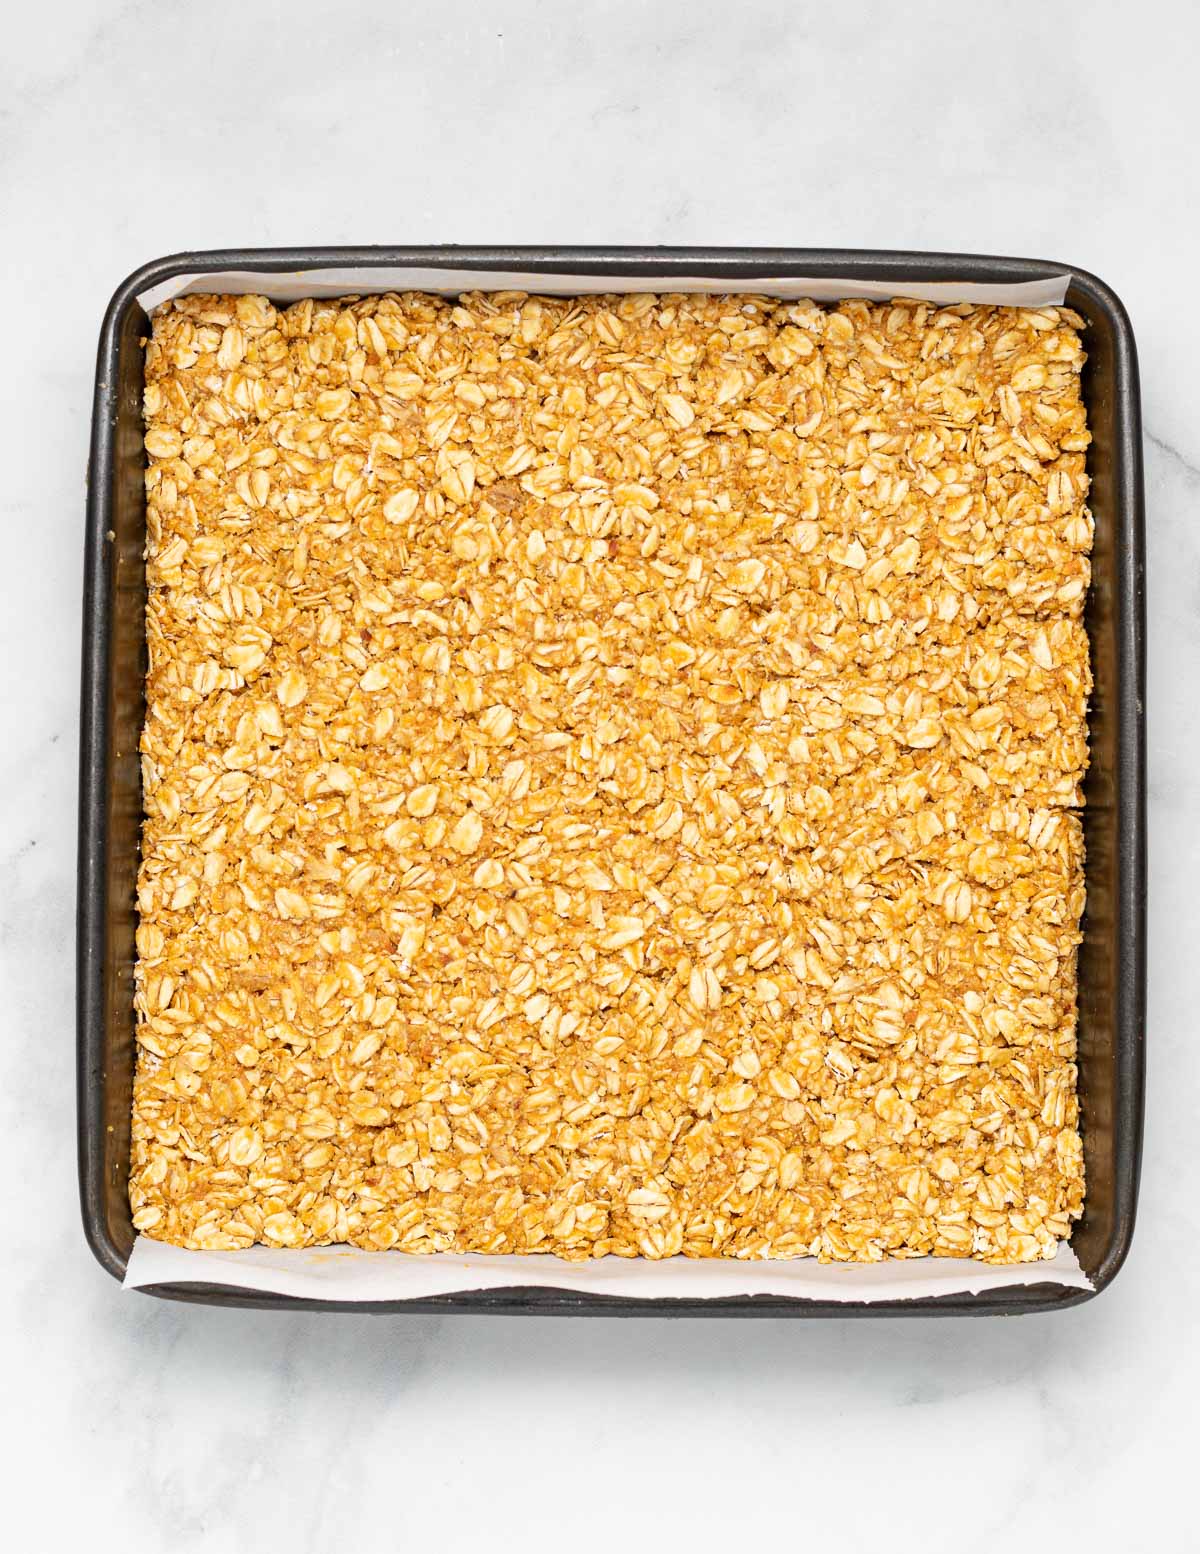 no bake oatmeal peanut butter bar mixture packed in a lined pan